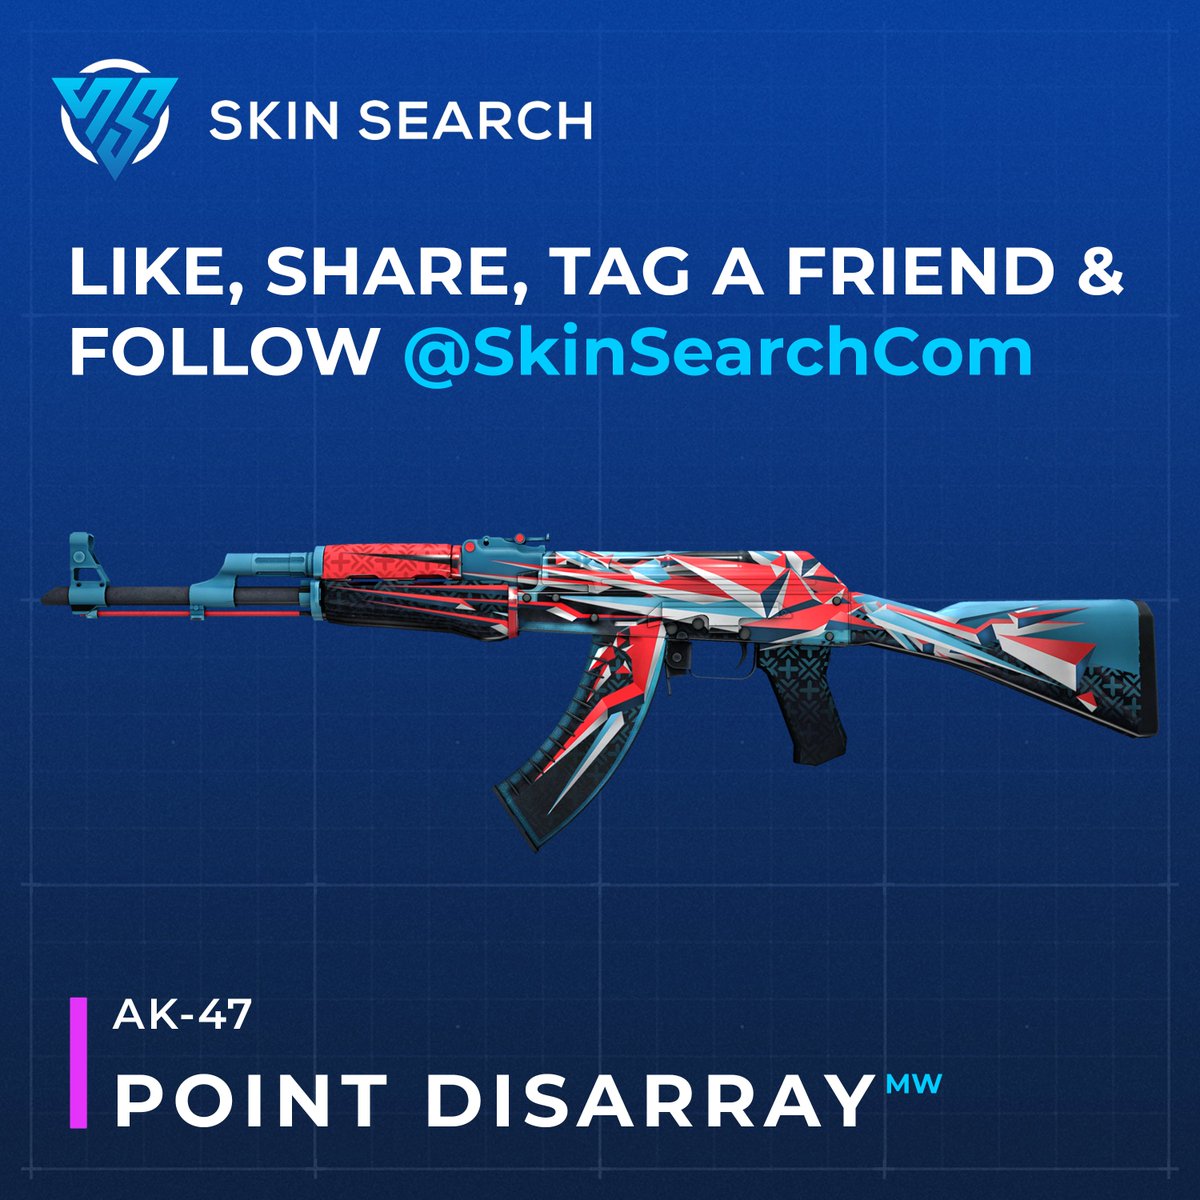 ⚡️FLASH GIVEAWAY⚡️
We wanted to do something for you all for your constant support, so we did! For a chance of winning this Point Disarray, all you need to do is:

- Like this post
- Tag someone in the comments
- Share this post
- Follow @SkinSearchCom on X/Twitter
- Visit…